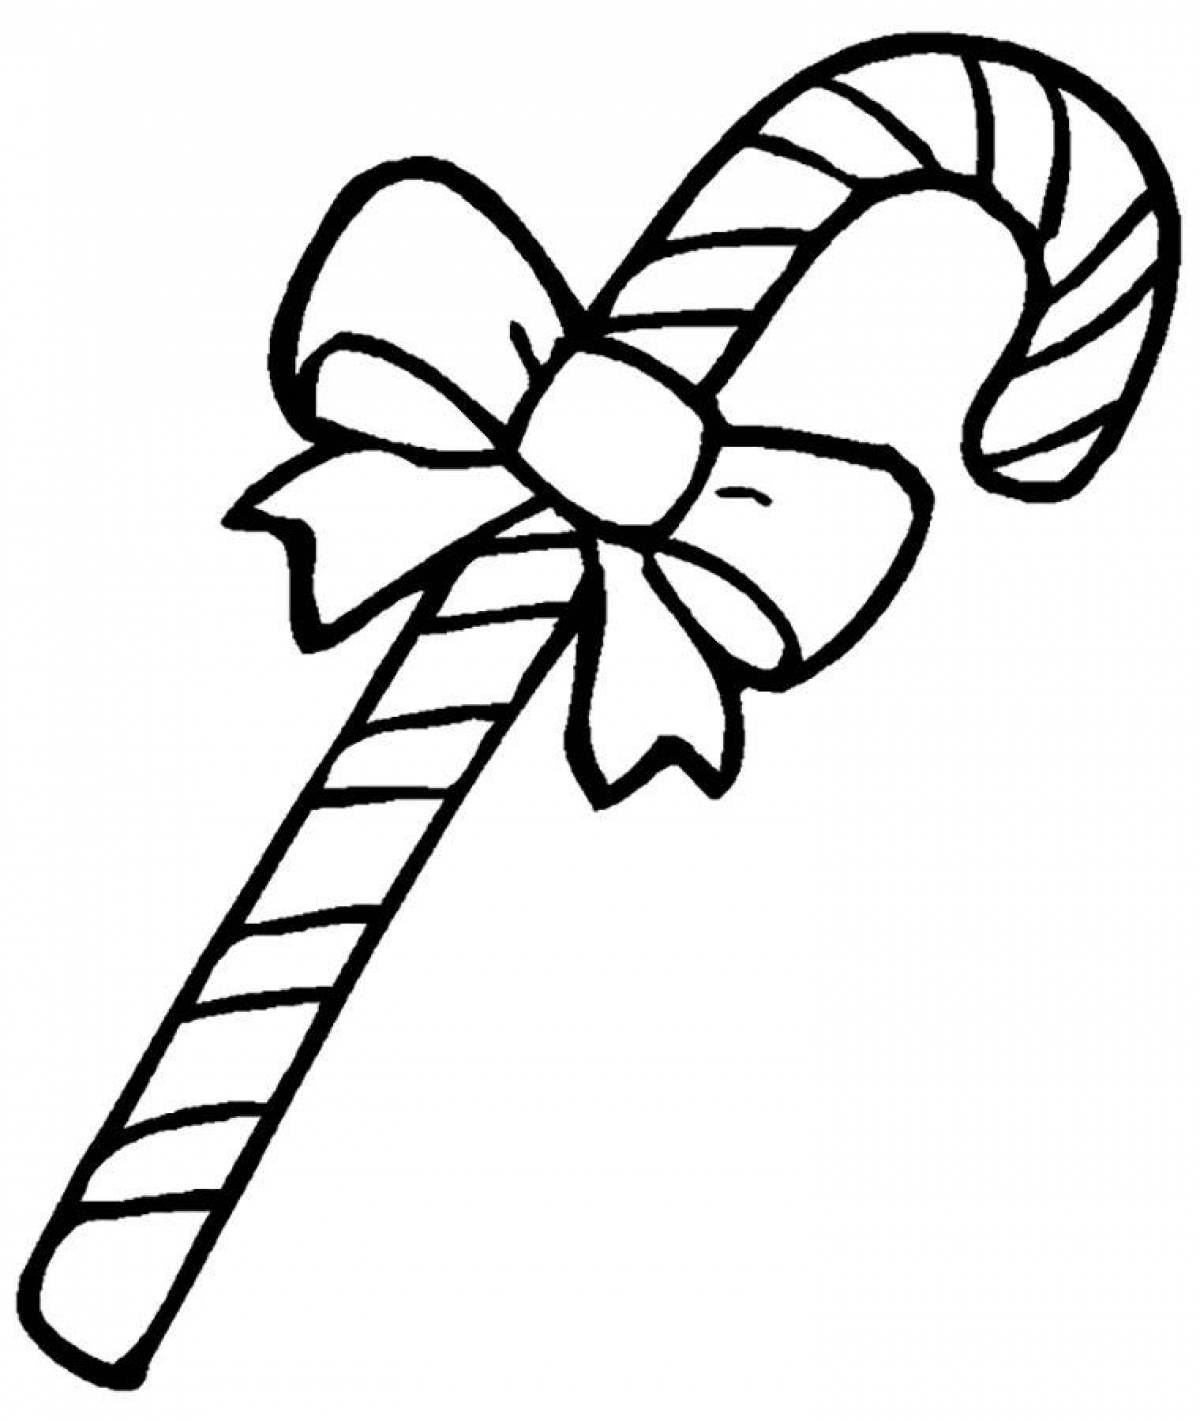 Ambrosial candy coloring pages